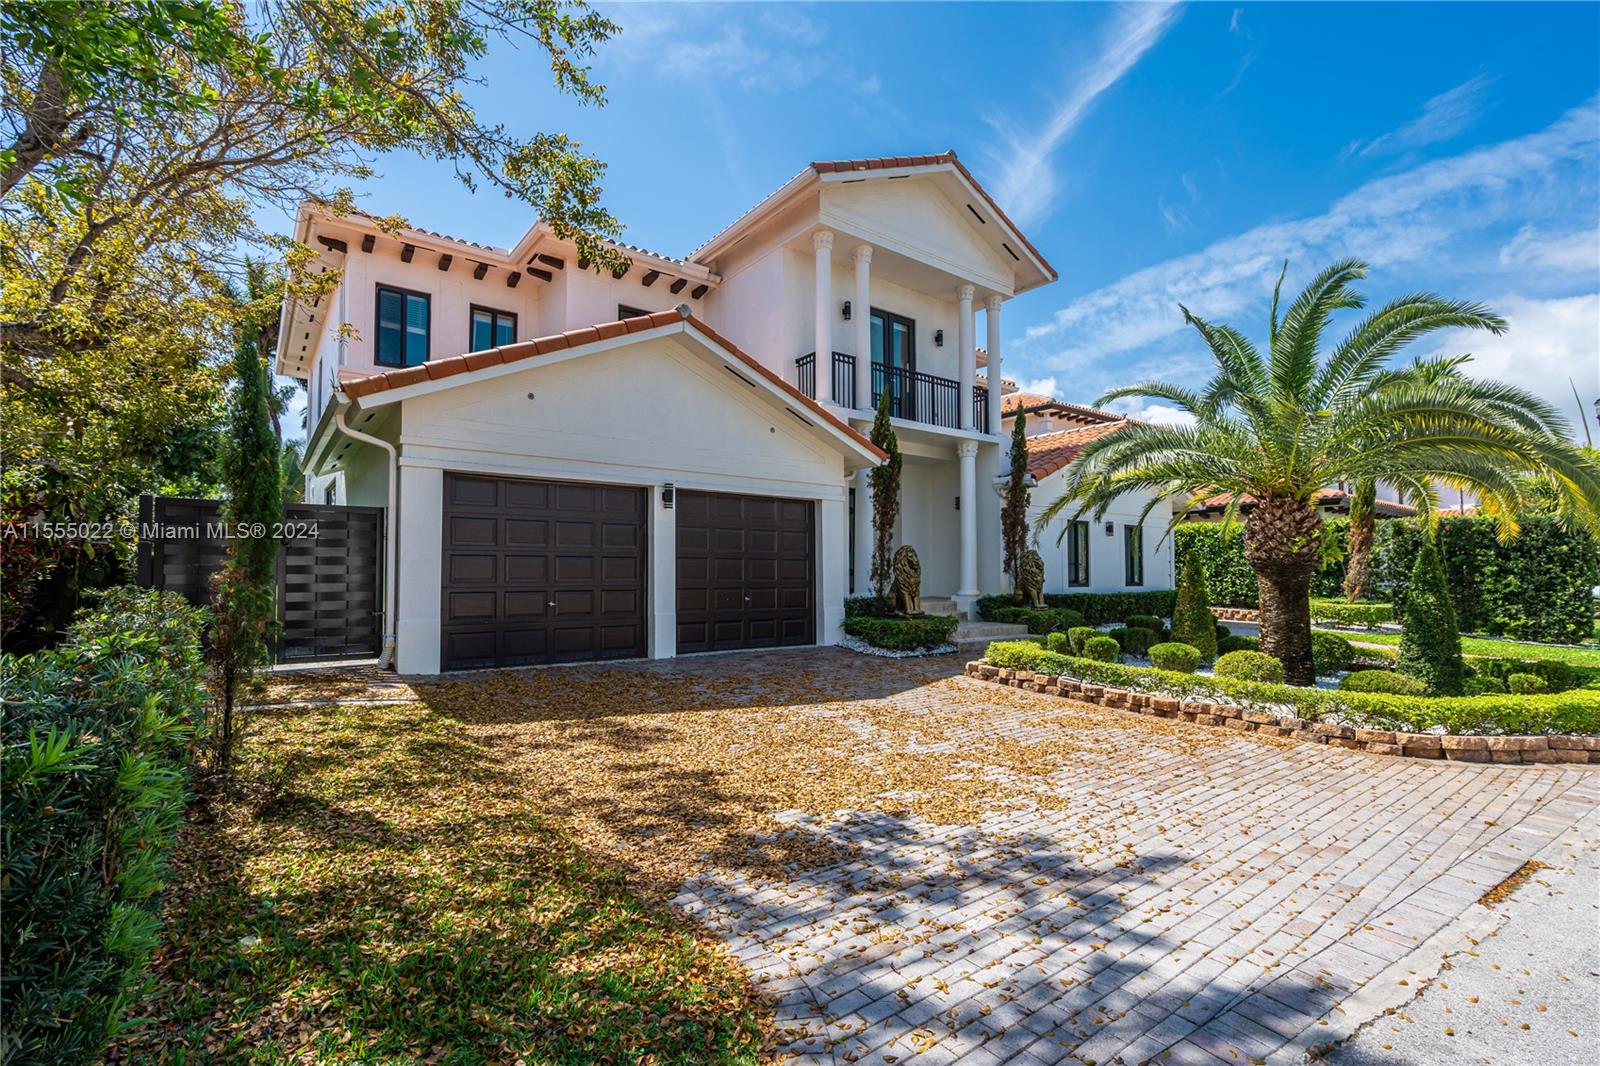 Experience luxurious contemporary living in this fully updated Cutler Cay masterpiece! With over $200k in upgrades, this unique and opulent home boasts 6 spacious bedrooms, 5 elegant bathrooms, and a gourmet kitchen with top-of-the-line appliances. Enjoy peace of mind with high-impact windows and doors. Step outside to your private oasis with a rejuvenating saltwater pool, perfect for relaxation or entertaining guests. Nestled in the gated community of Cutler Cay, this home offers unmatched elegance, security, and modern luxury living at its finest!